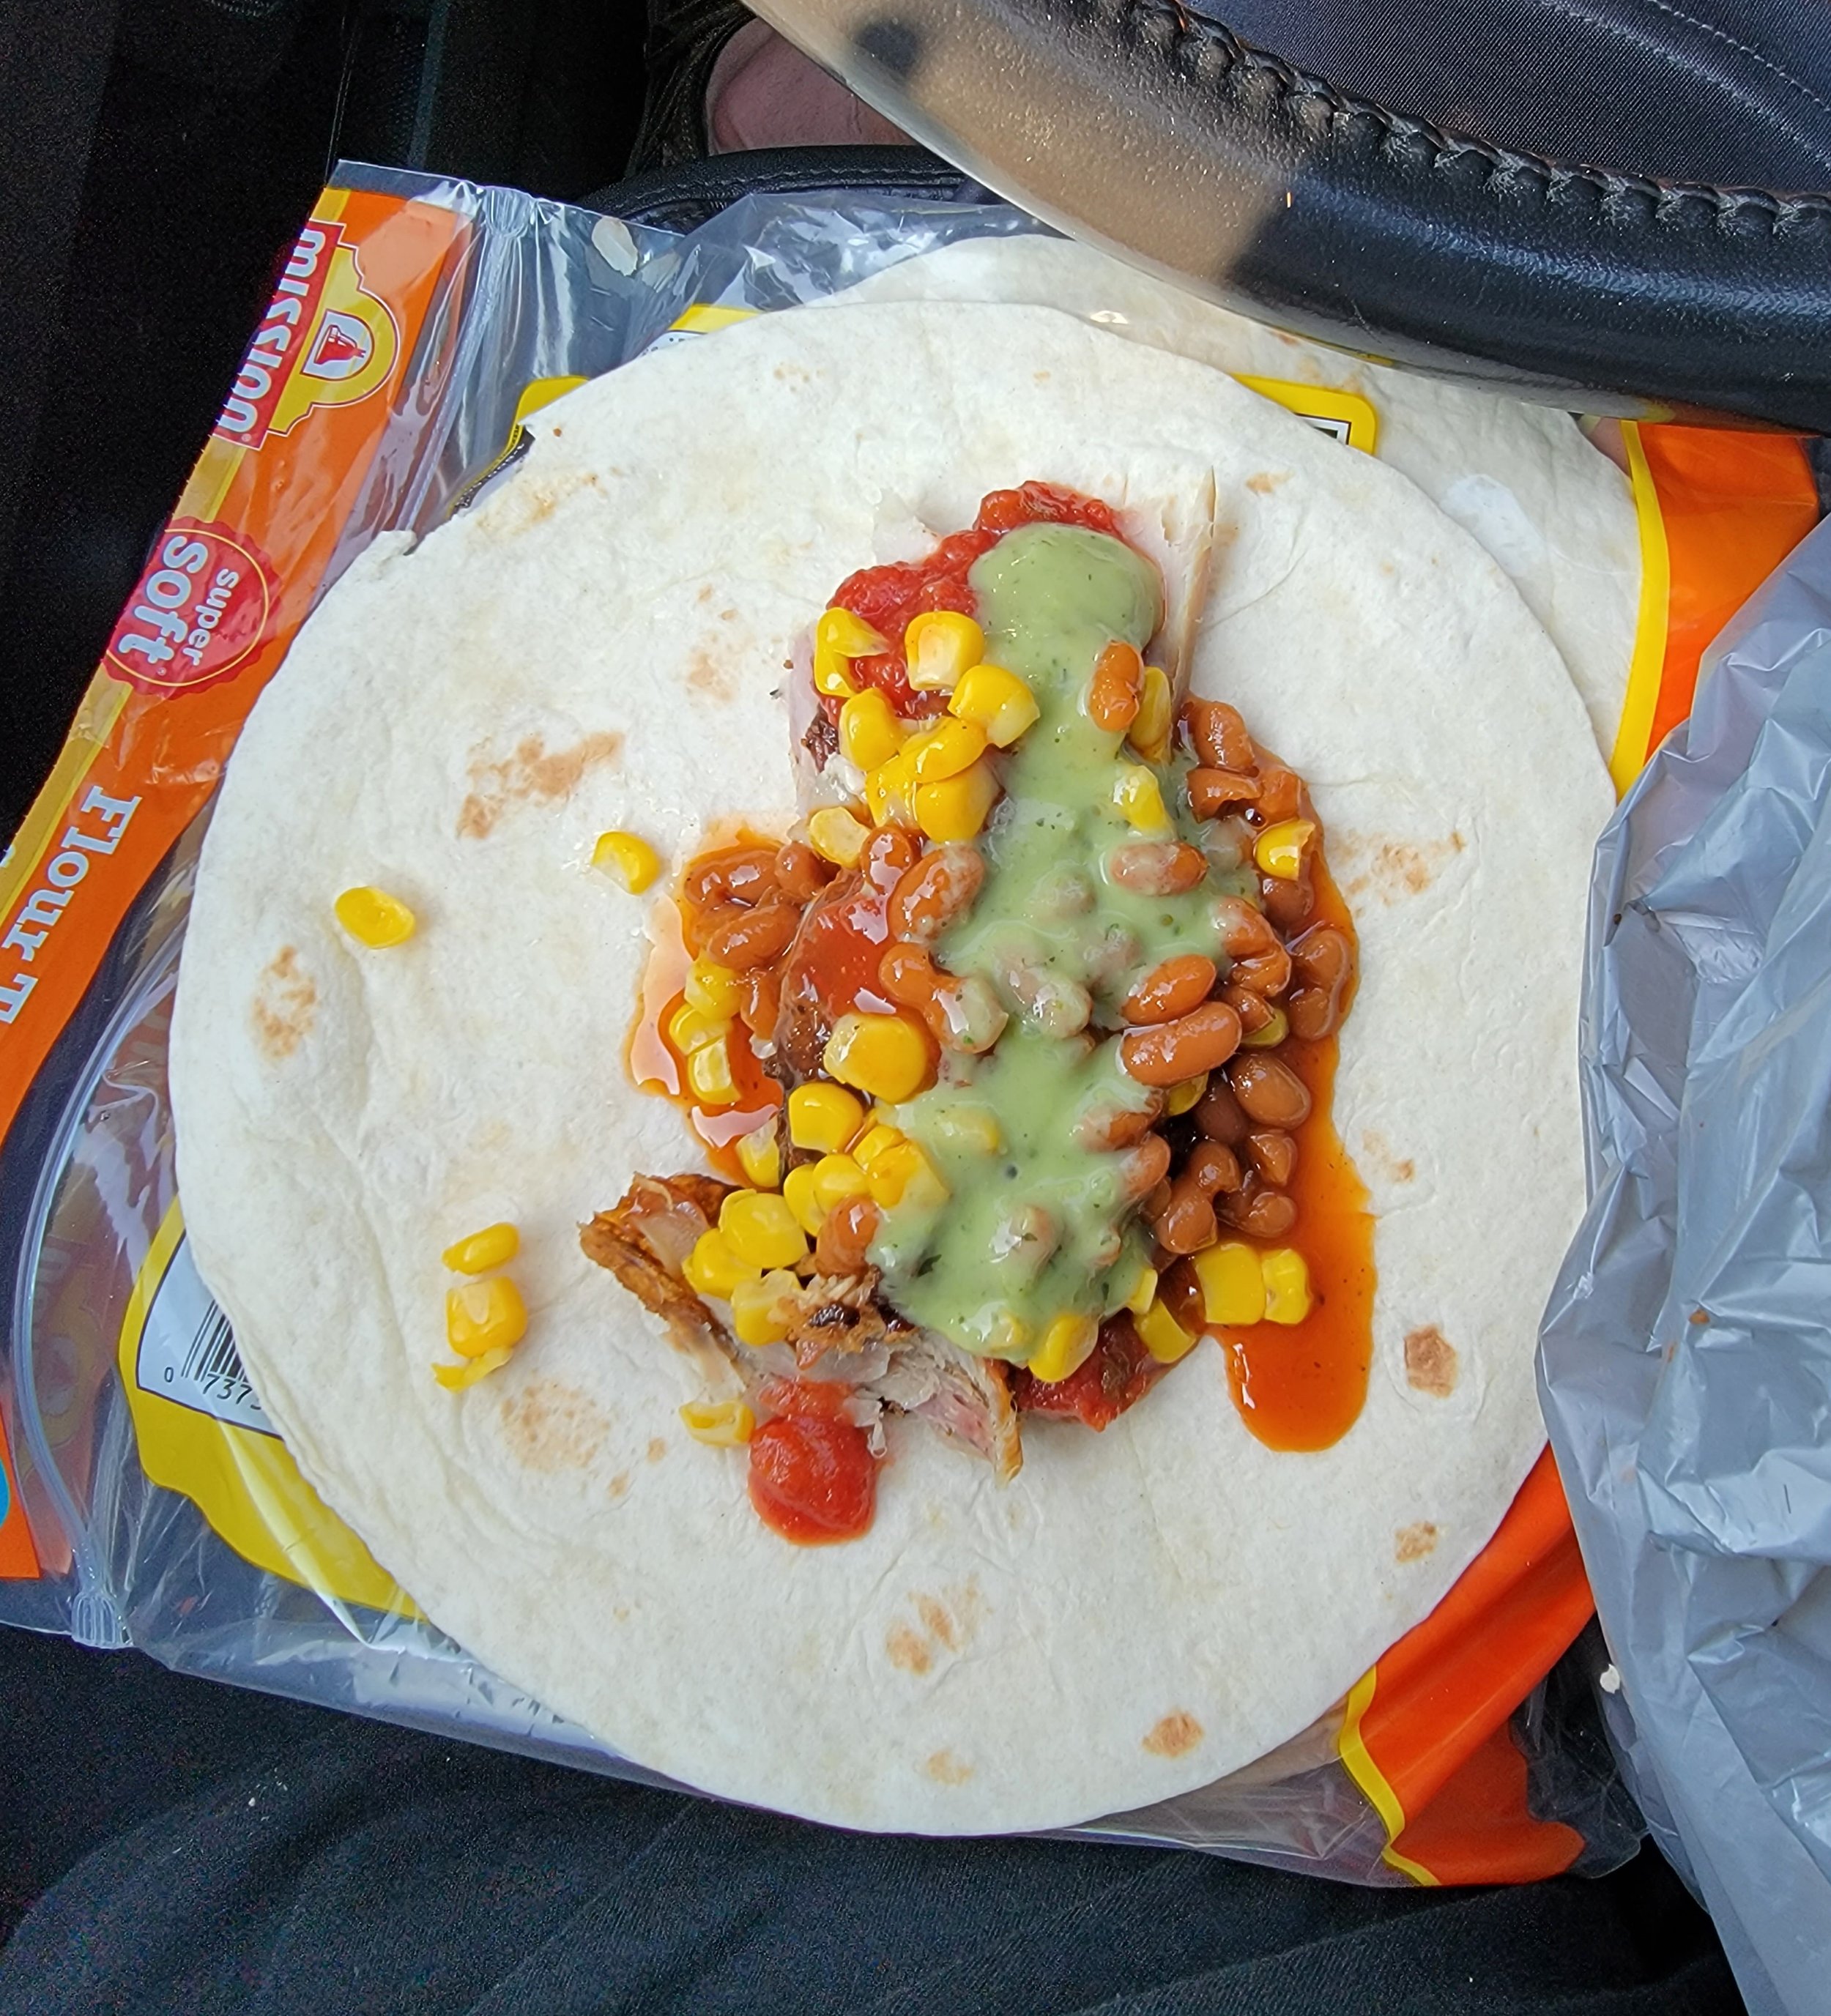 Stopped at Taco John's day prior and was disappointed by their lame fast food burritos so just made my own roaditos. 